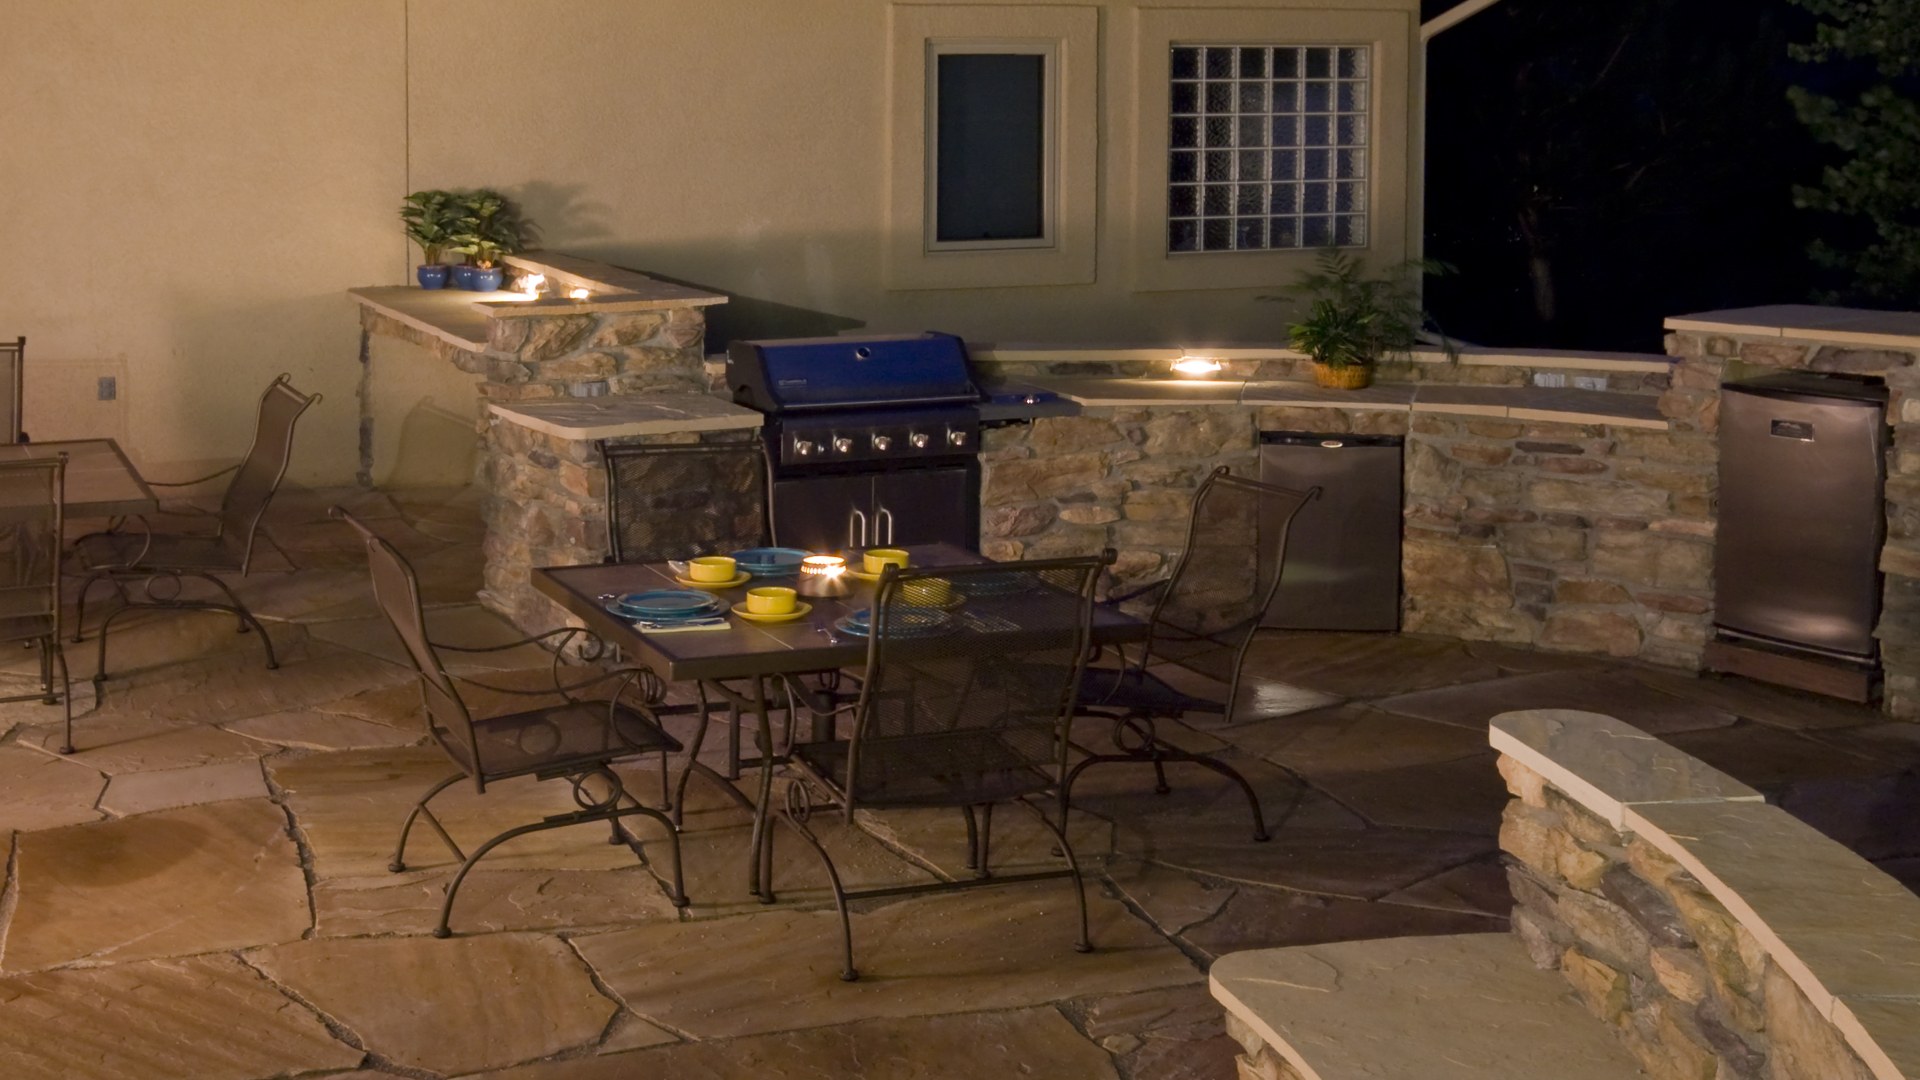 3 Tips for Designing an Outdoor Kitchen From Scratch